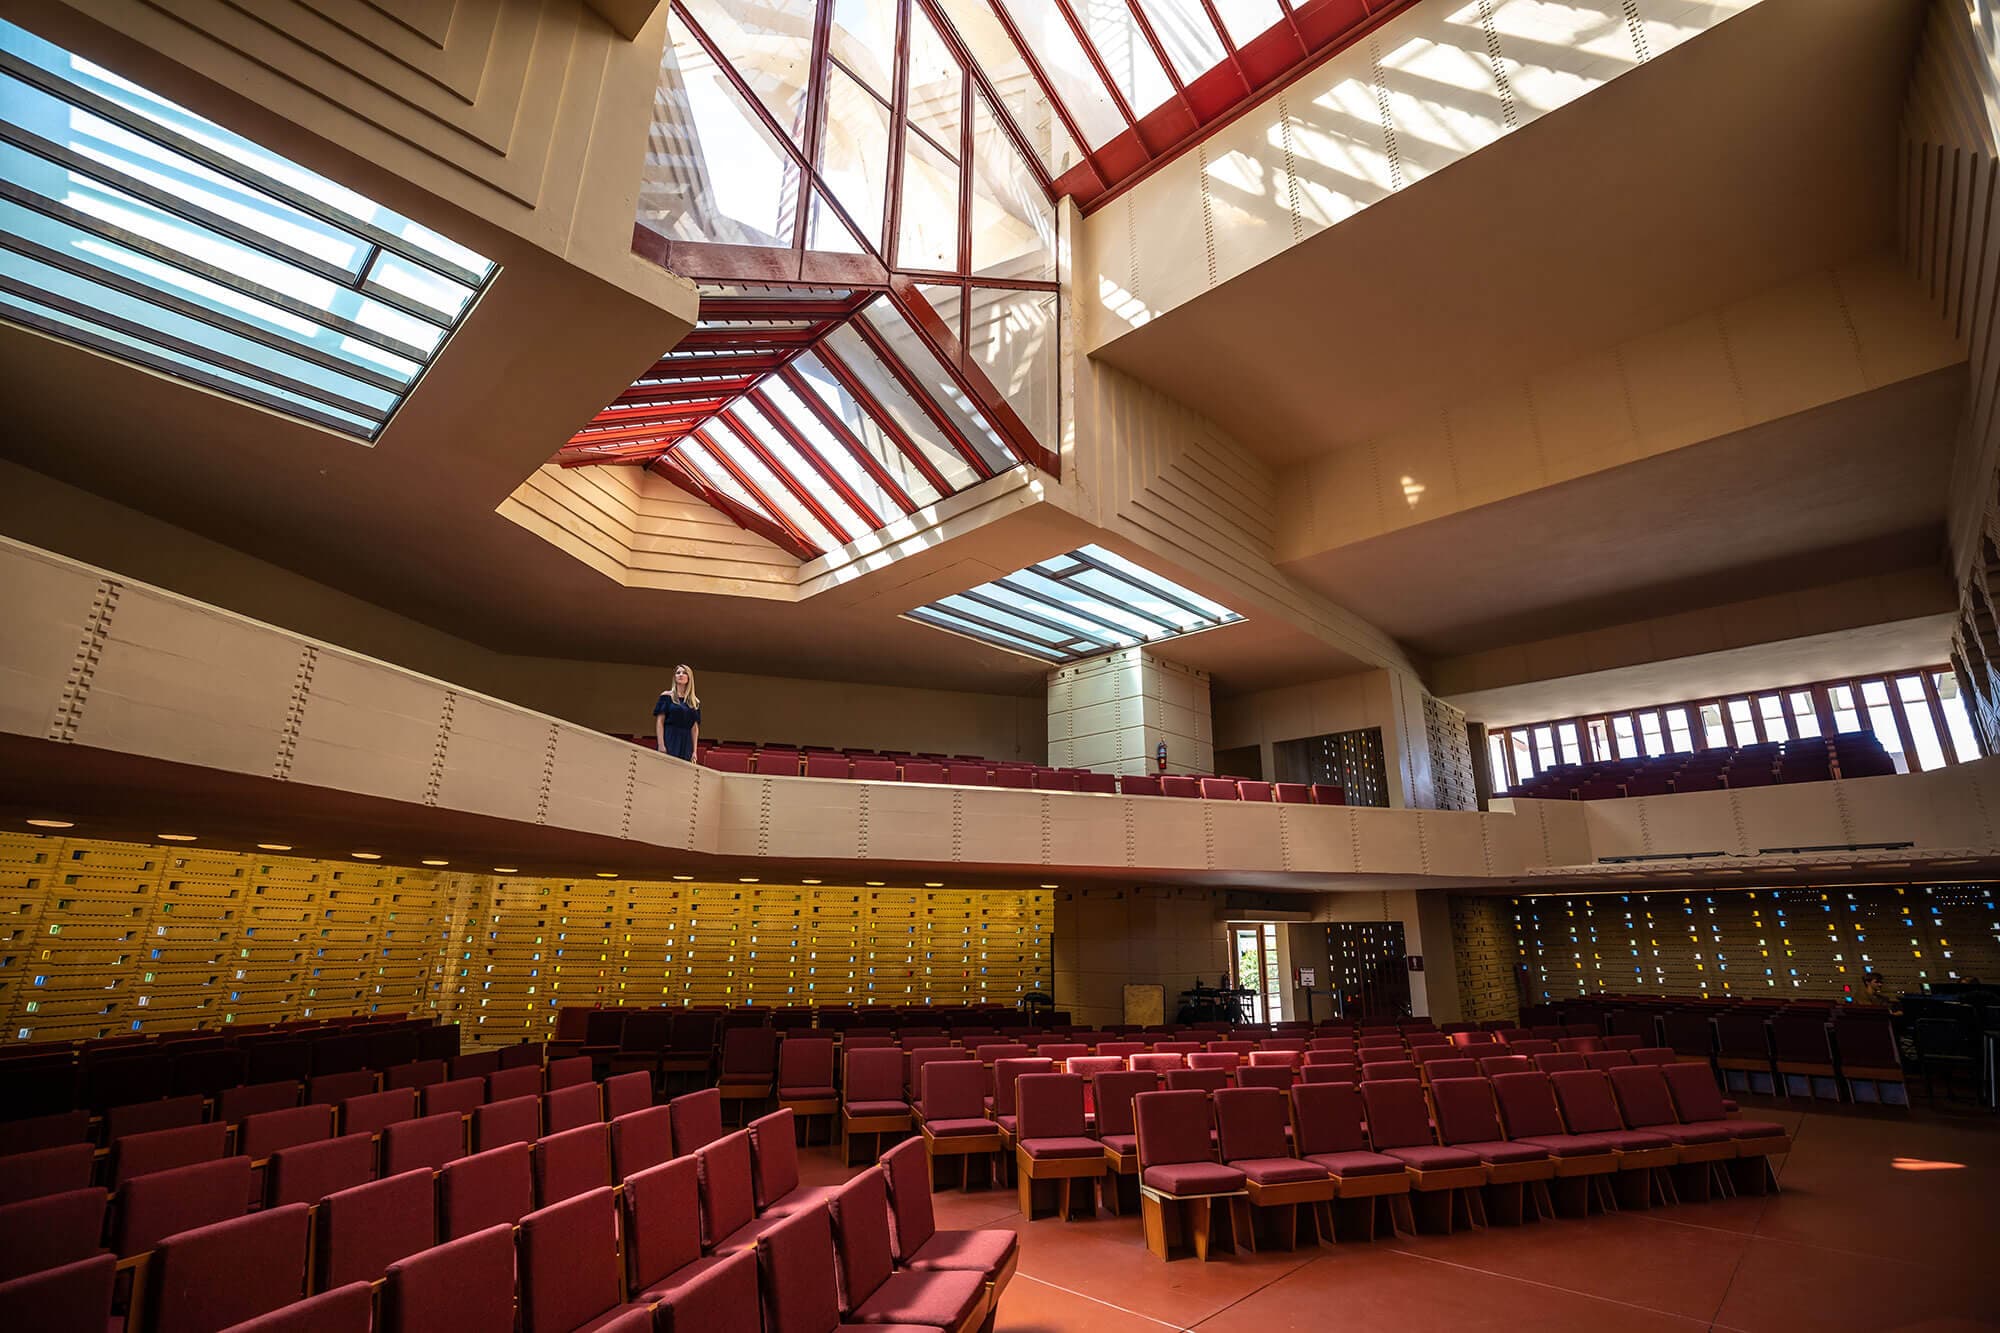 Inside Frank Lloyd Wright's Annie Pfeiffer Chapel at Florida Southern College in Lakeland, FL. Woman standing in balcony seating area.